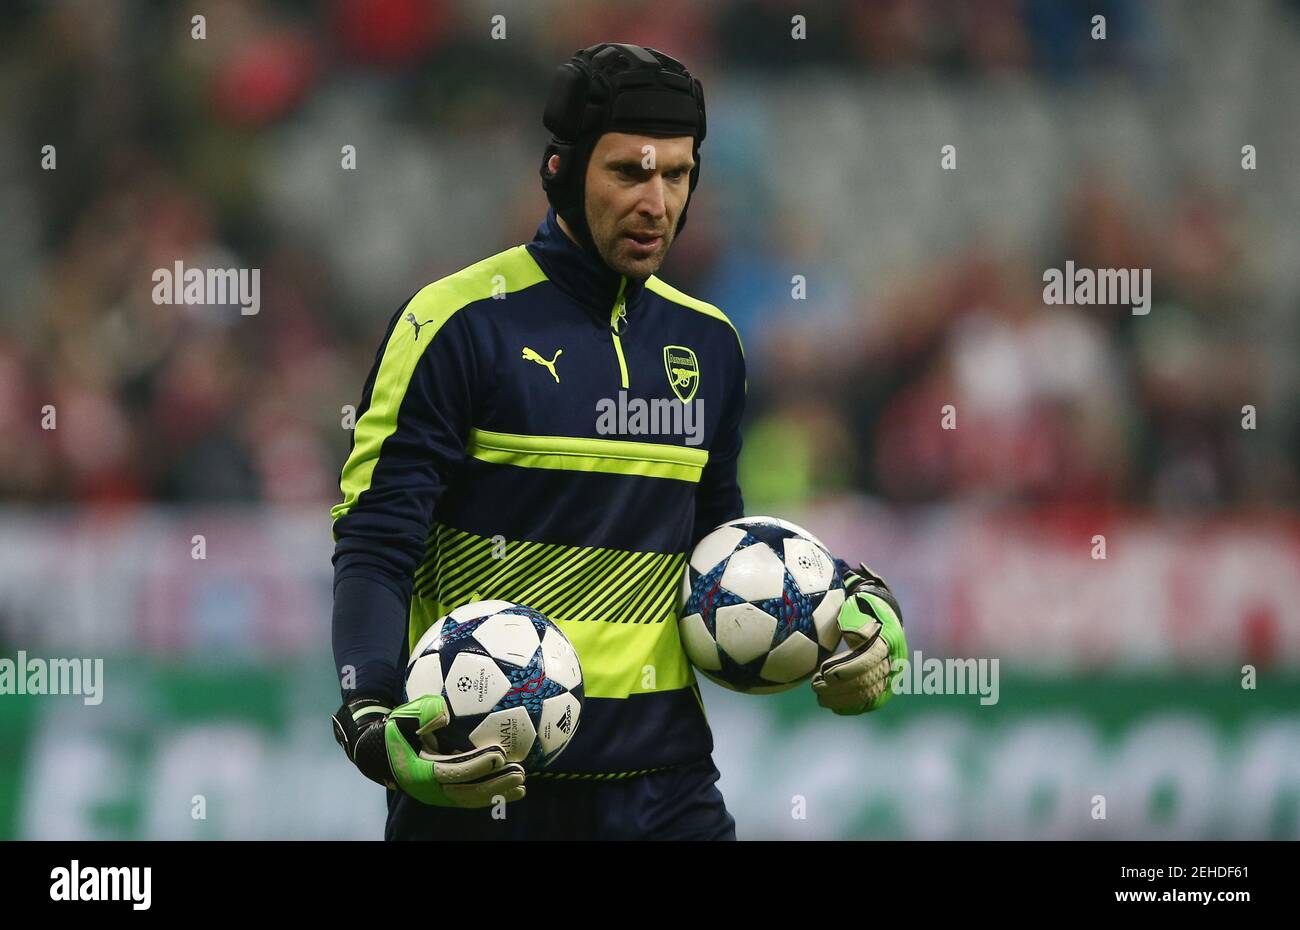 Football Soccer - Bayern Munich v Arsenal - UEFA Champions League Round of 16 First Leg - Allianz Arena, Munich, Germany - 15/2/17 Arsenal's Petr Cech warms up before the match  Reuters / Michael Dalder Livepic Stock Photo